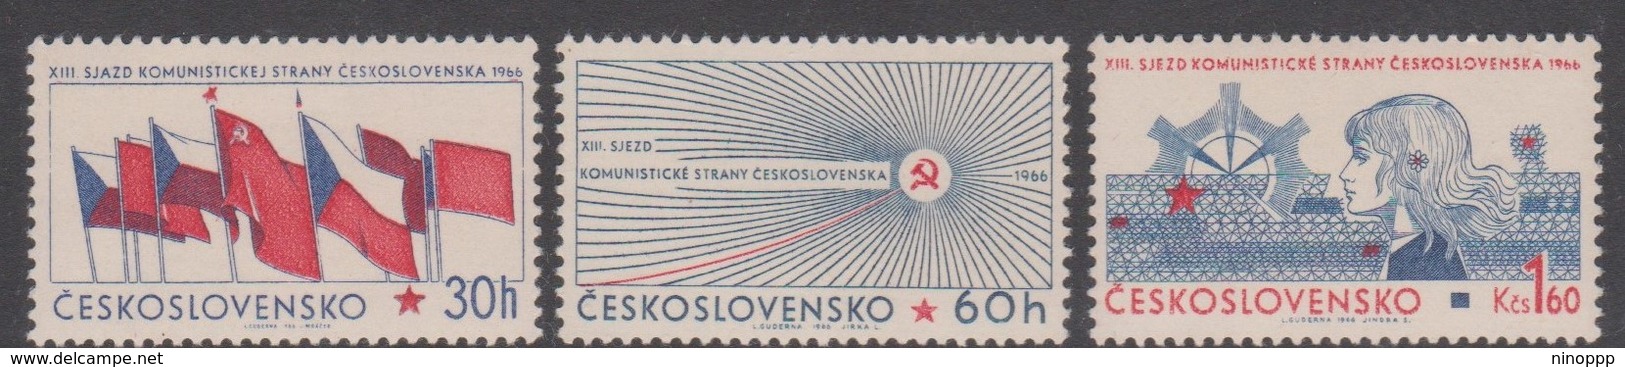 Czechoslovakia Scott 1397-1399 1966 13th Congress Communist Party, Mint Never Hinged - Unused Stamps